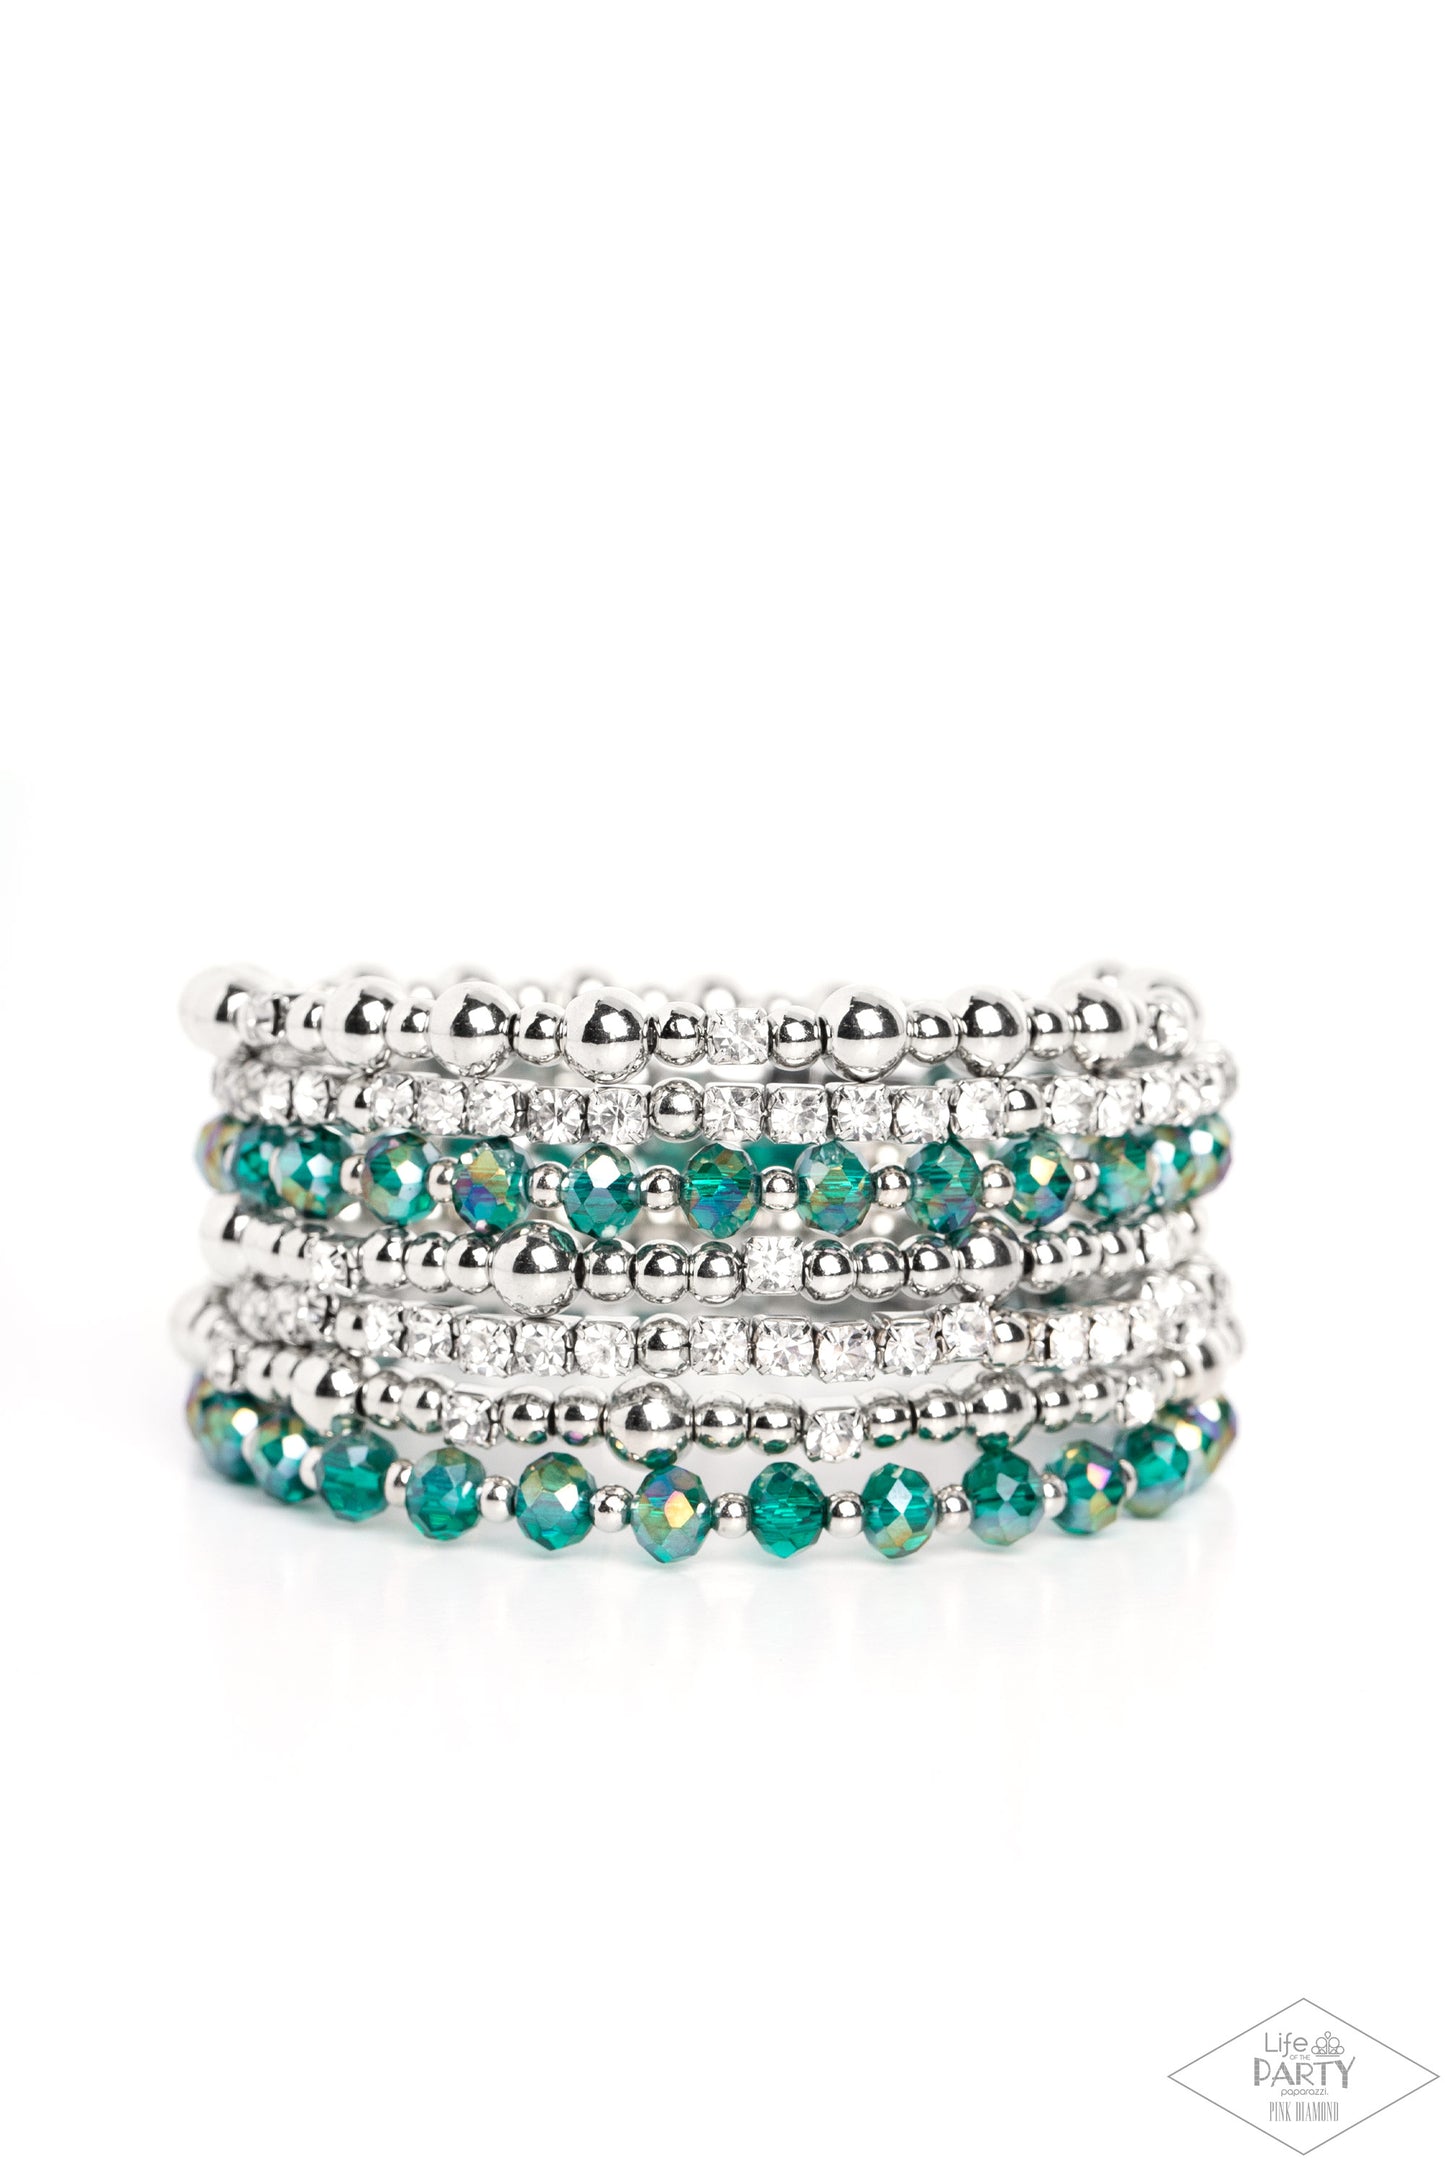 ICE Knowing You Multi Coil Bracelet - Paparazzi Accessories  An icy collection of silver beads, cubes, opaque green crystals with an iridescent shimmer, and glassy white rhinestones are threaded along a coiled wire, creating a blinding infinity wrap style bracelet around the wrist. Due to its prismatic palette, color may vary.  Sold as one individual bracelet.  P9RE-MTGR-132XX 